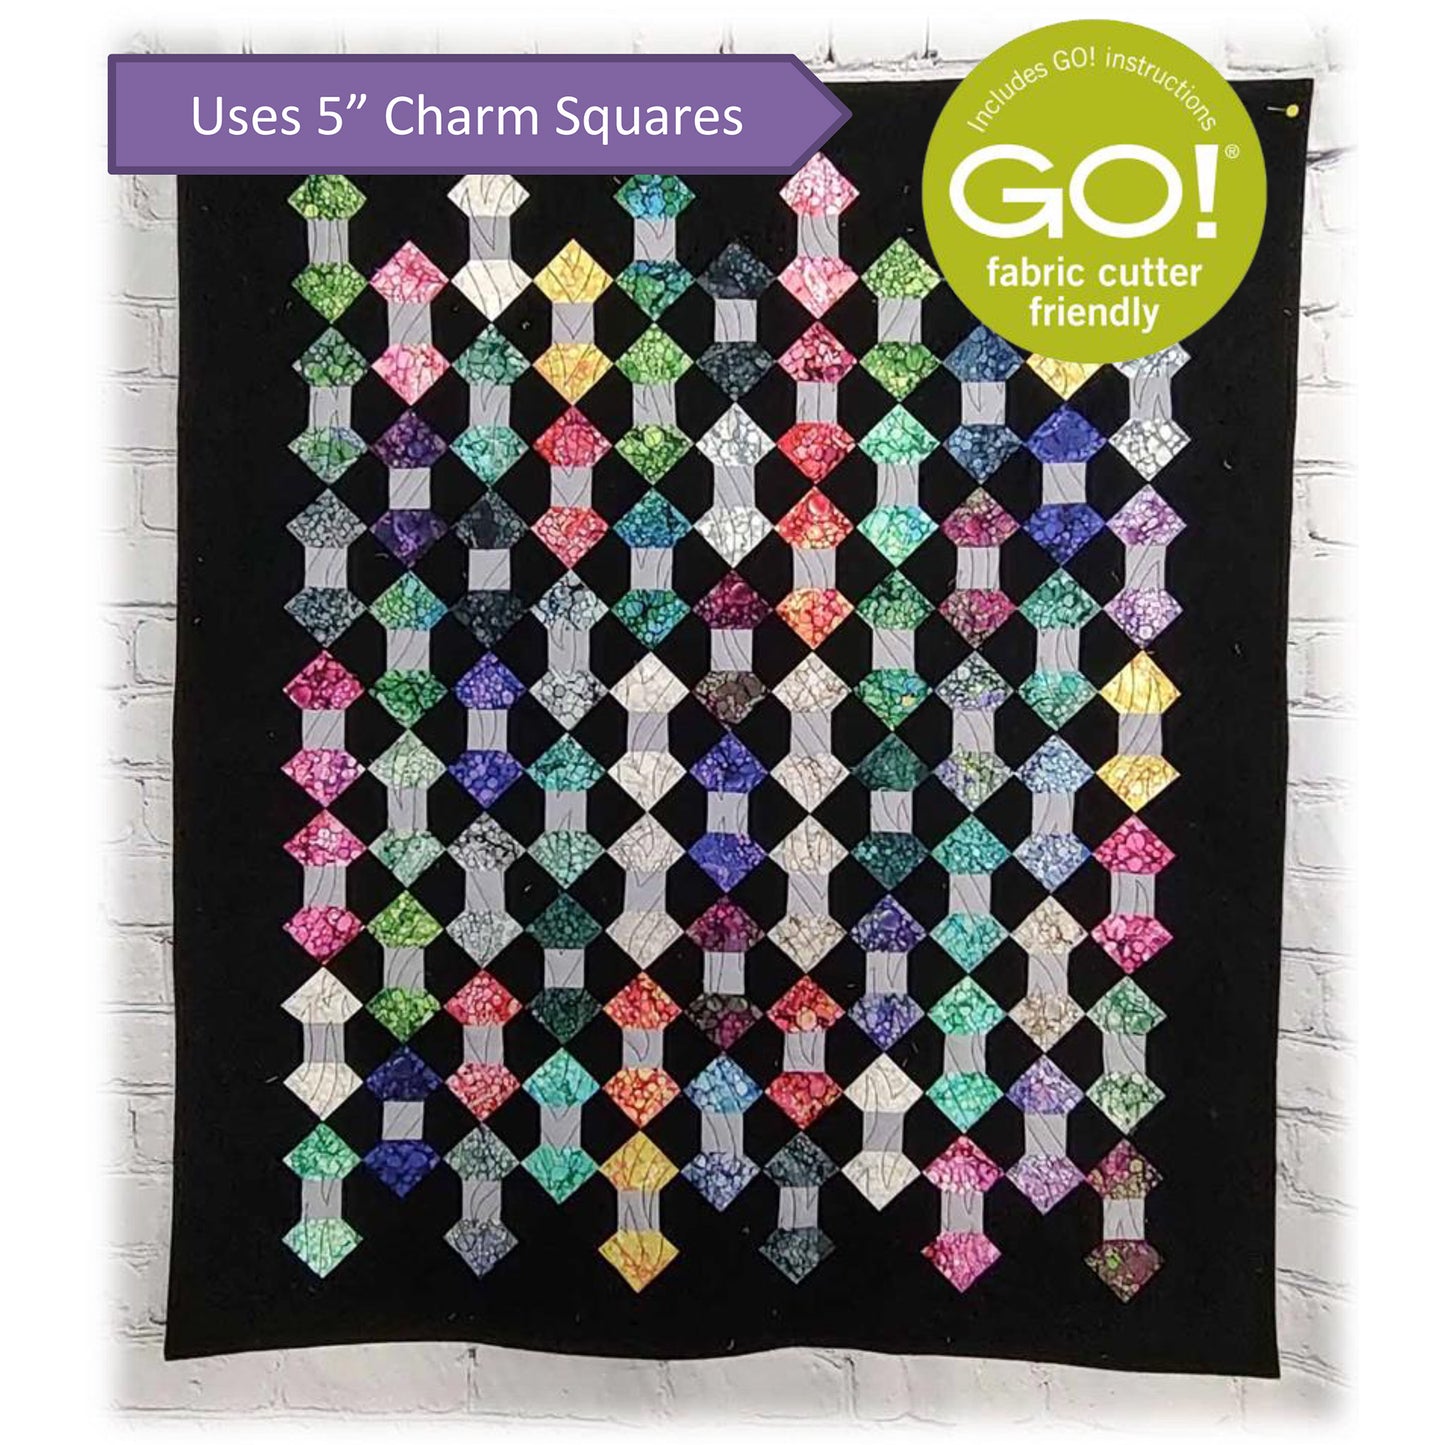 Colorful quilt is scrappy with rows and columns of two diamonds attached by a small strip of gray fabric.  Makes it look like bowties or could be skeins of yarn.